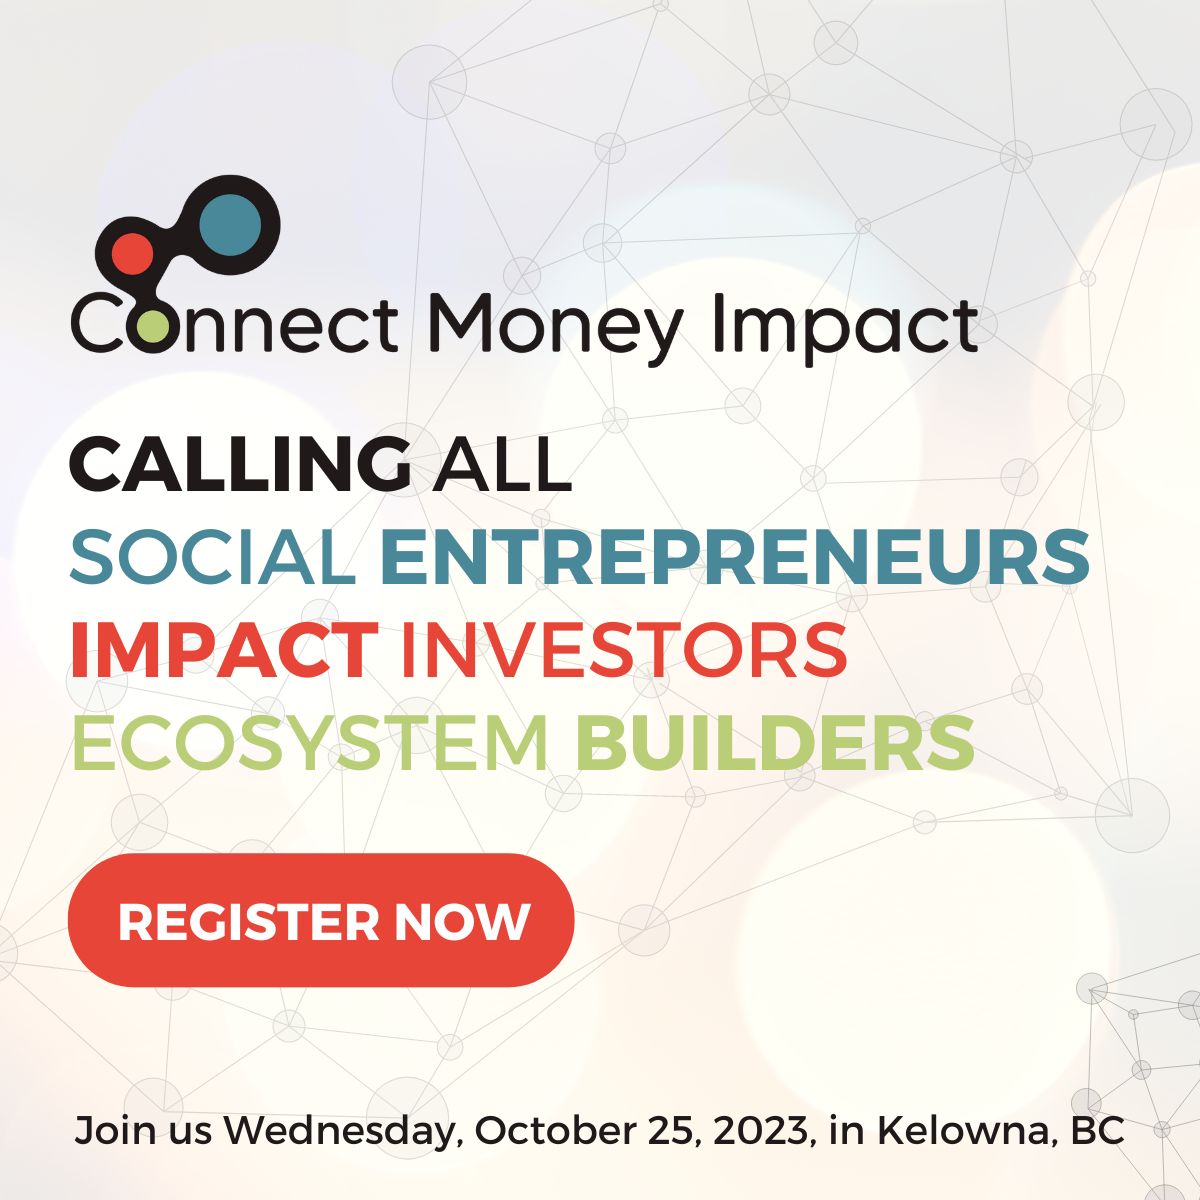 Register now for Connect Money Impact 2023